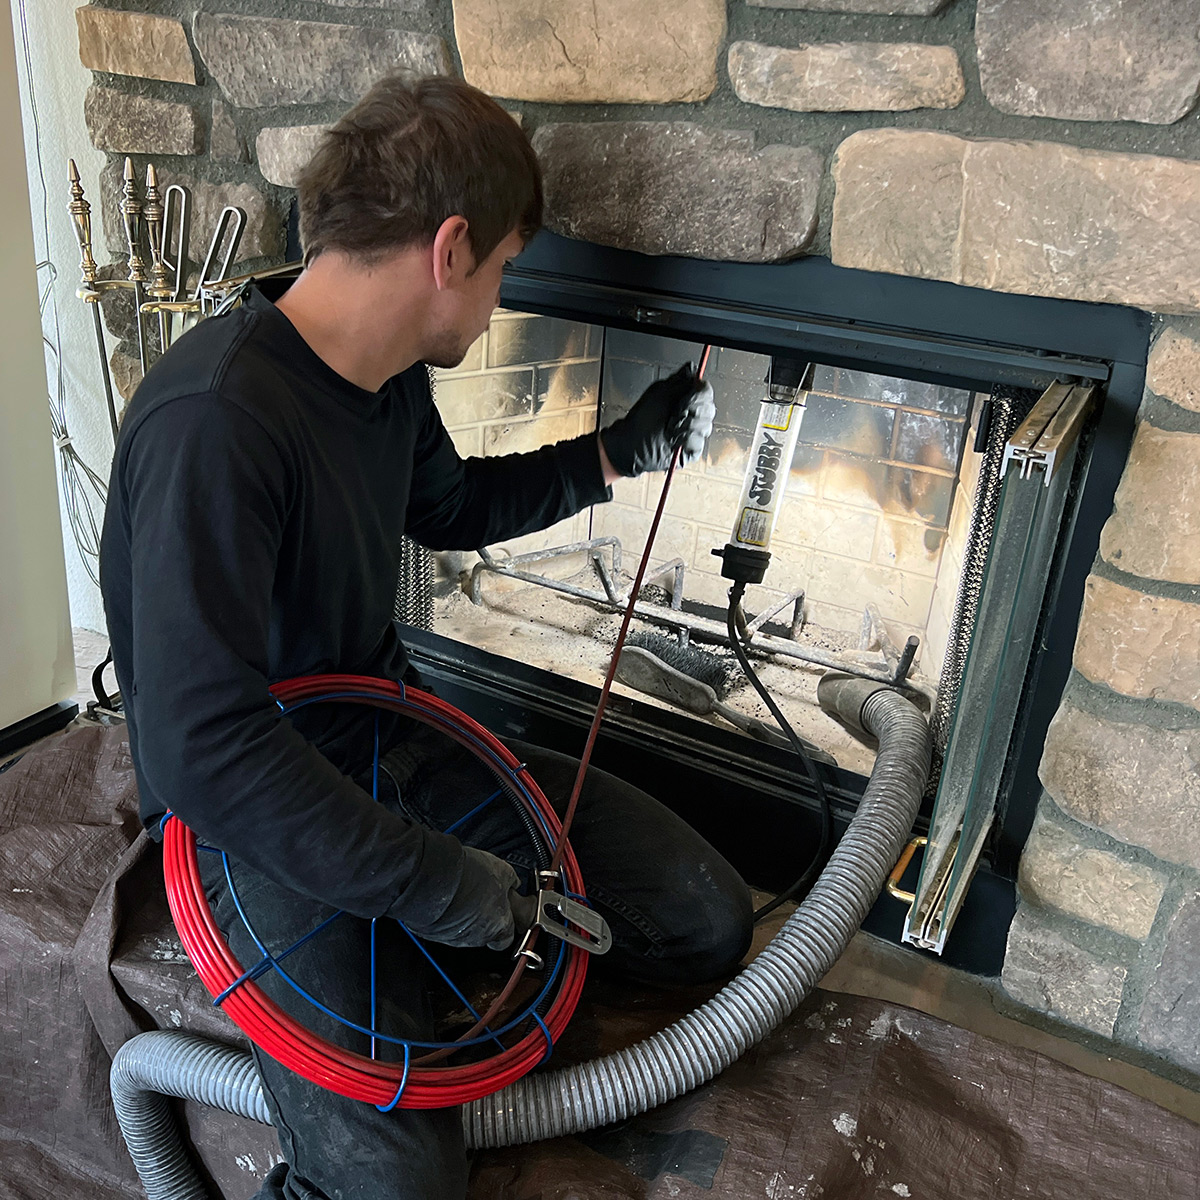 Air Duct Cleaning | MD, DC, VA | Duct Cleaning, Dryer Vent Cleaning. DMV Air Duct Cleaning MD DC is a local Company based in Bowie MD, Rockville MD, Washington DC and Fairfax VA. Dryer vent Cleaning, Air Duct Cleaning and ac vent Cleaning. Commercial and Residential Services